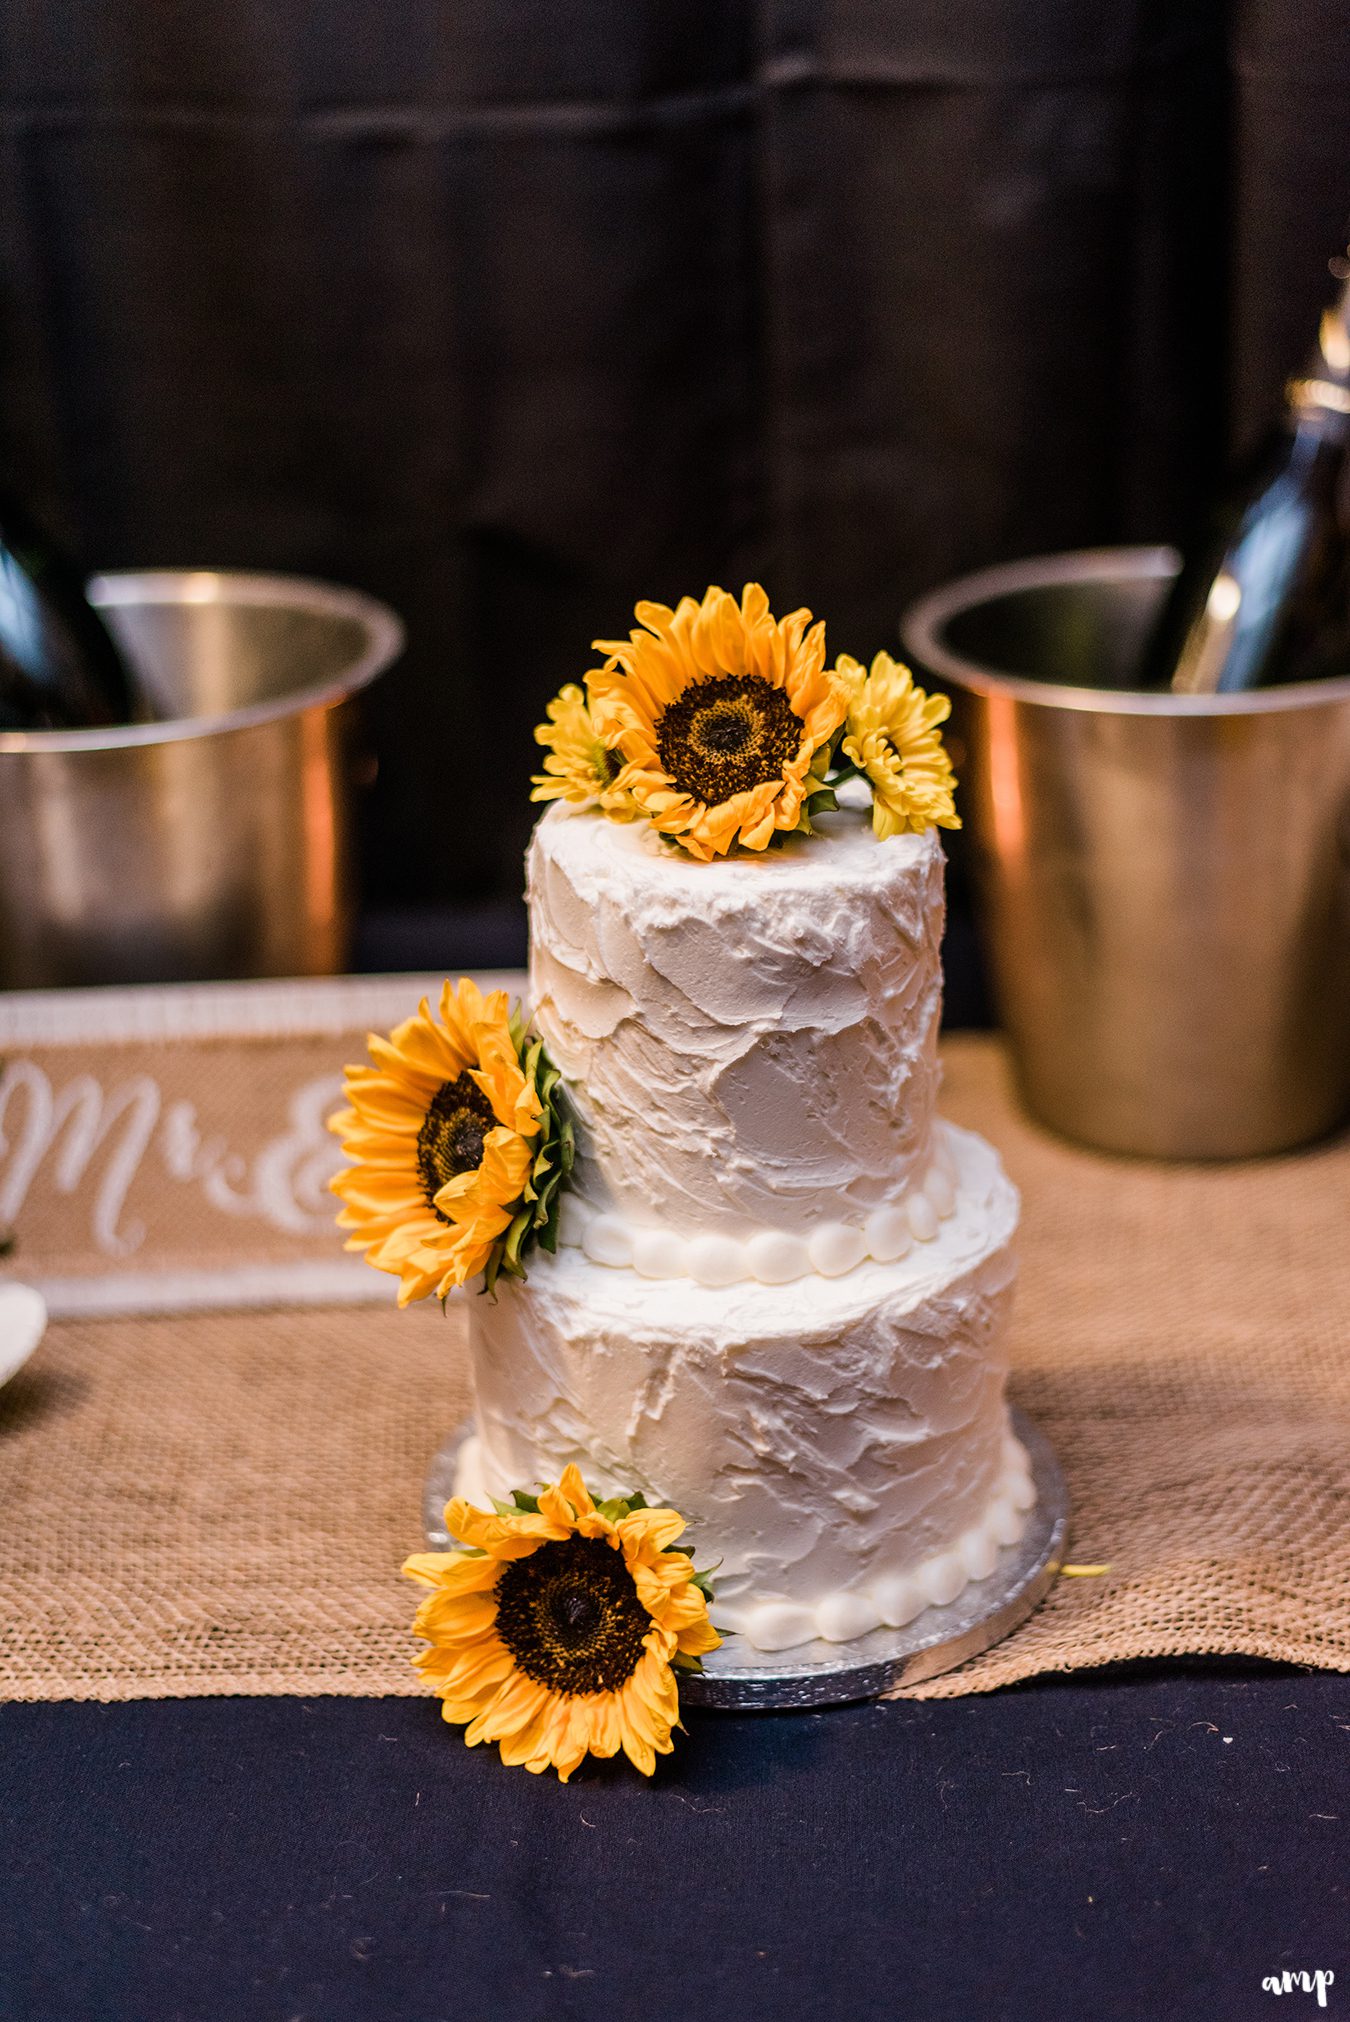 White frosted cake with sunflowers adorning it